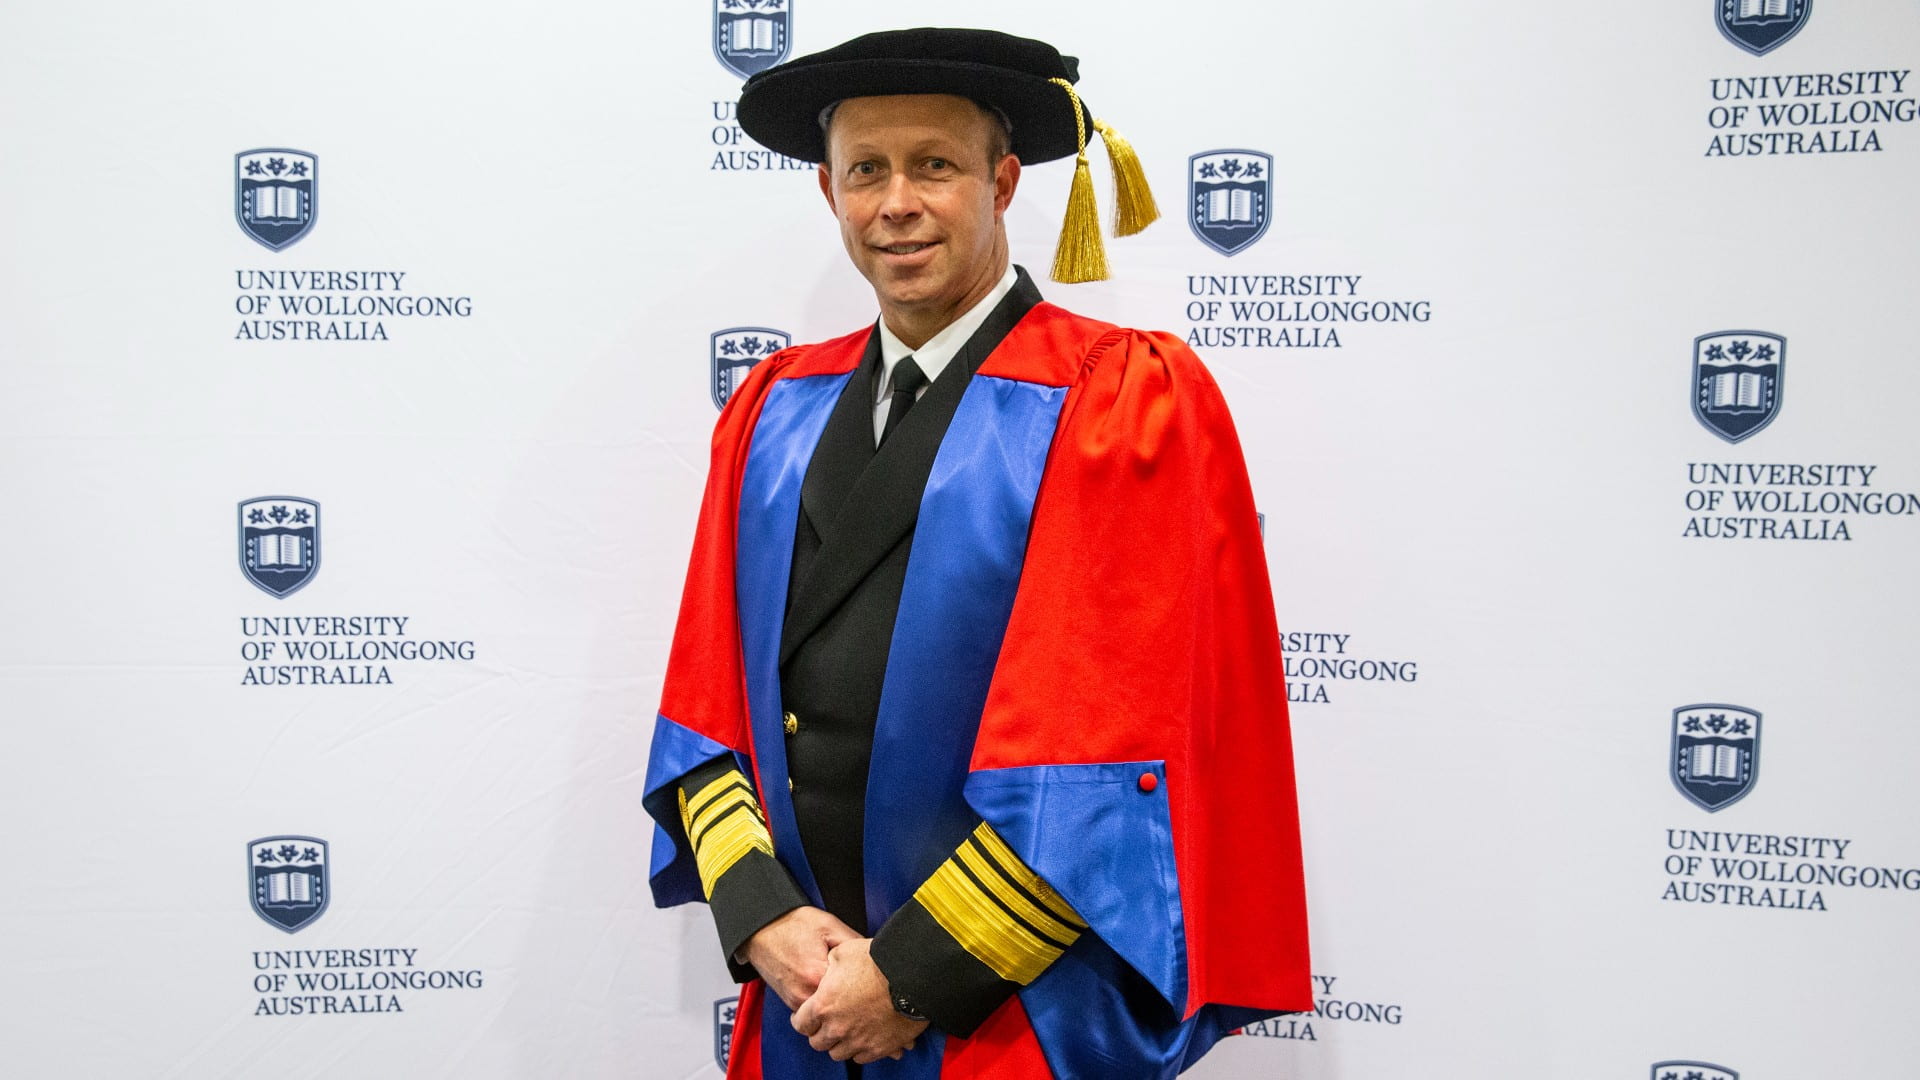 Vice Admiral Michael Noonan, wearing a red graduation gown, in front of a UOW media wall ahead of receiving his honorary doctorate. Photo: Paul Jones